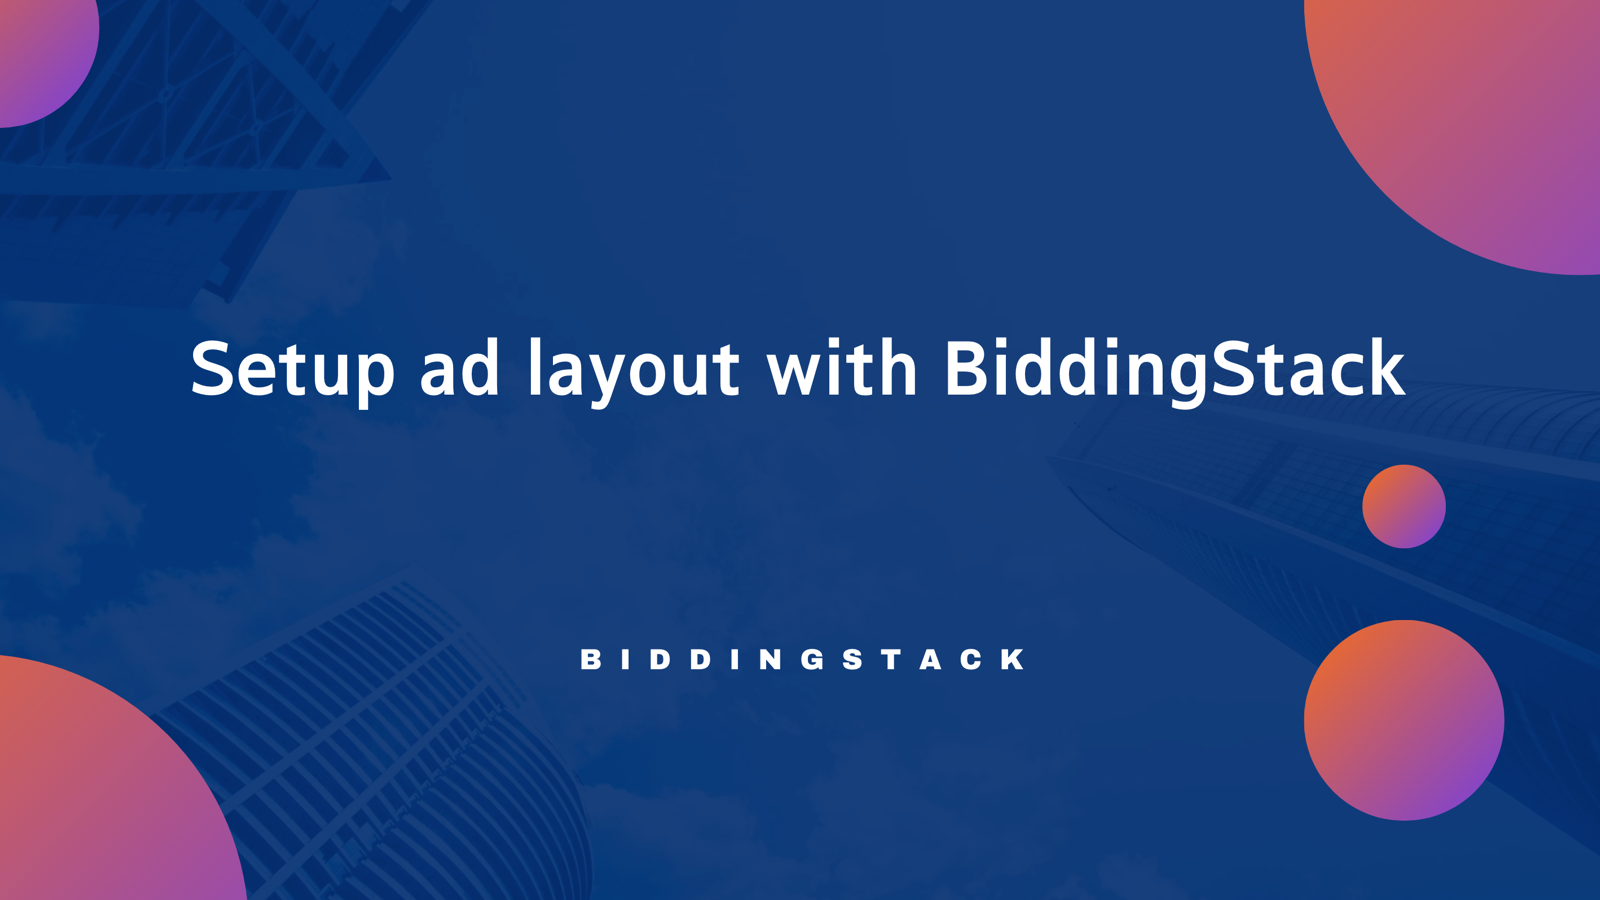 Measure and manage viewability with BiddingStack